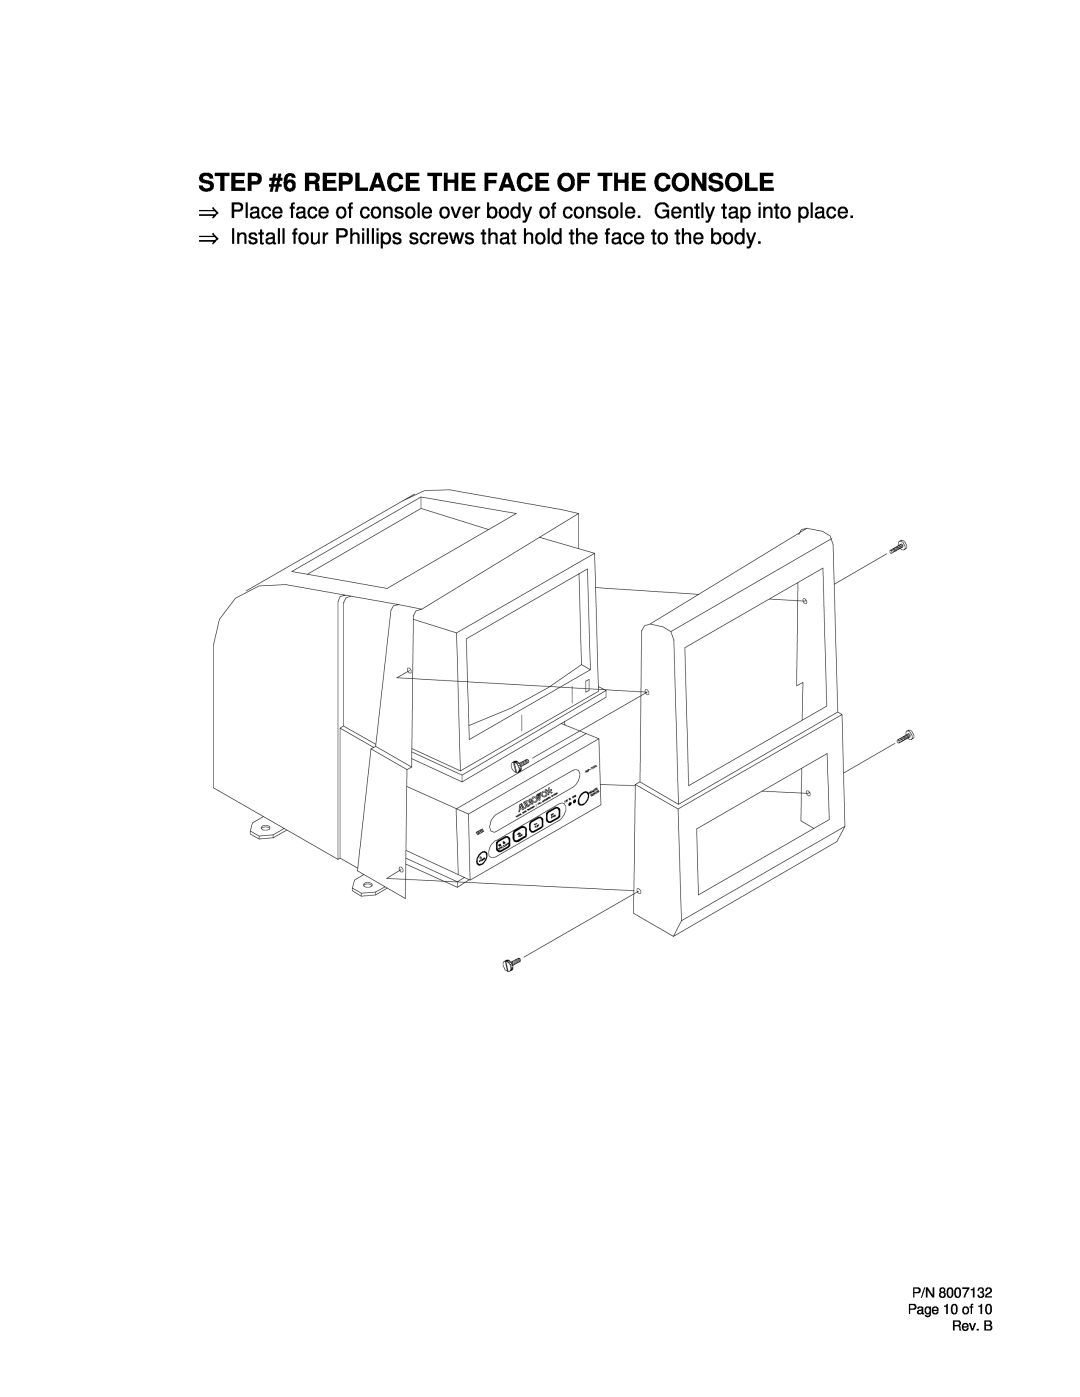 Audiovox K-9 installation instructions STEP #6 REPLACE THE FACE OF THE CONSOLE, P/N Page 10 of Rev. B 